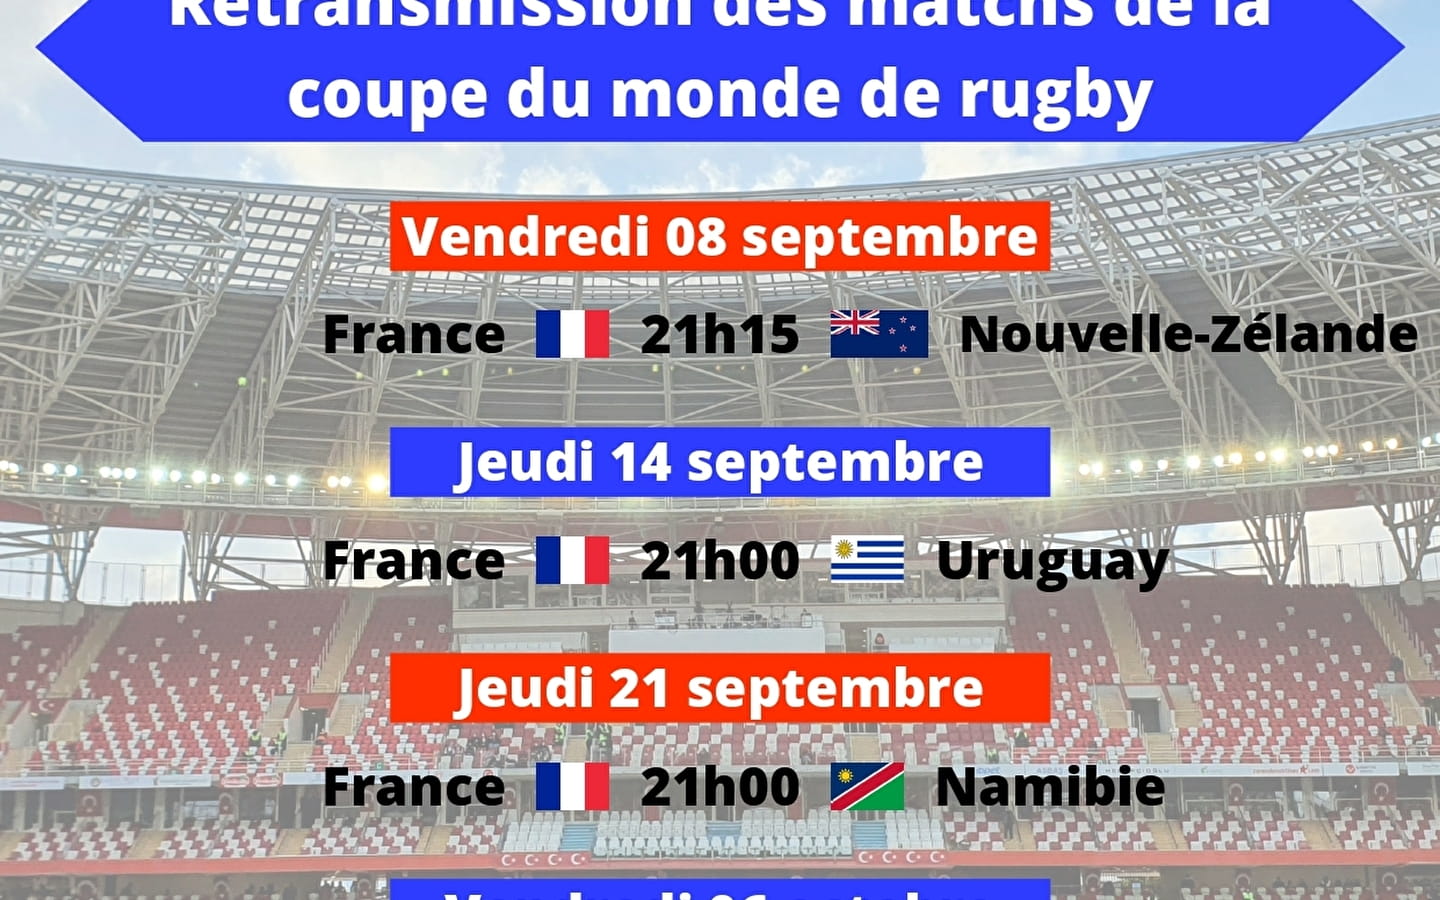 Broadcast of Rugby World Cup matches